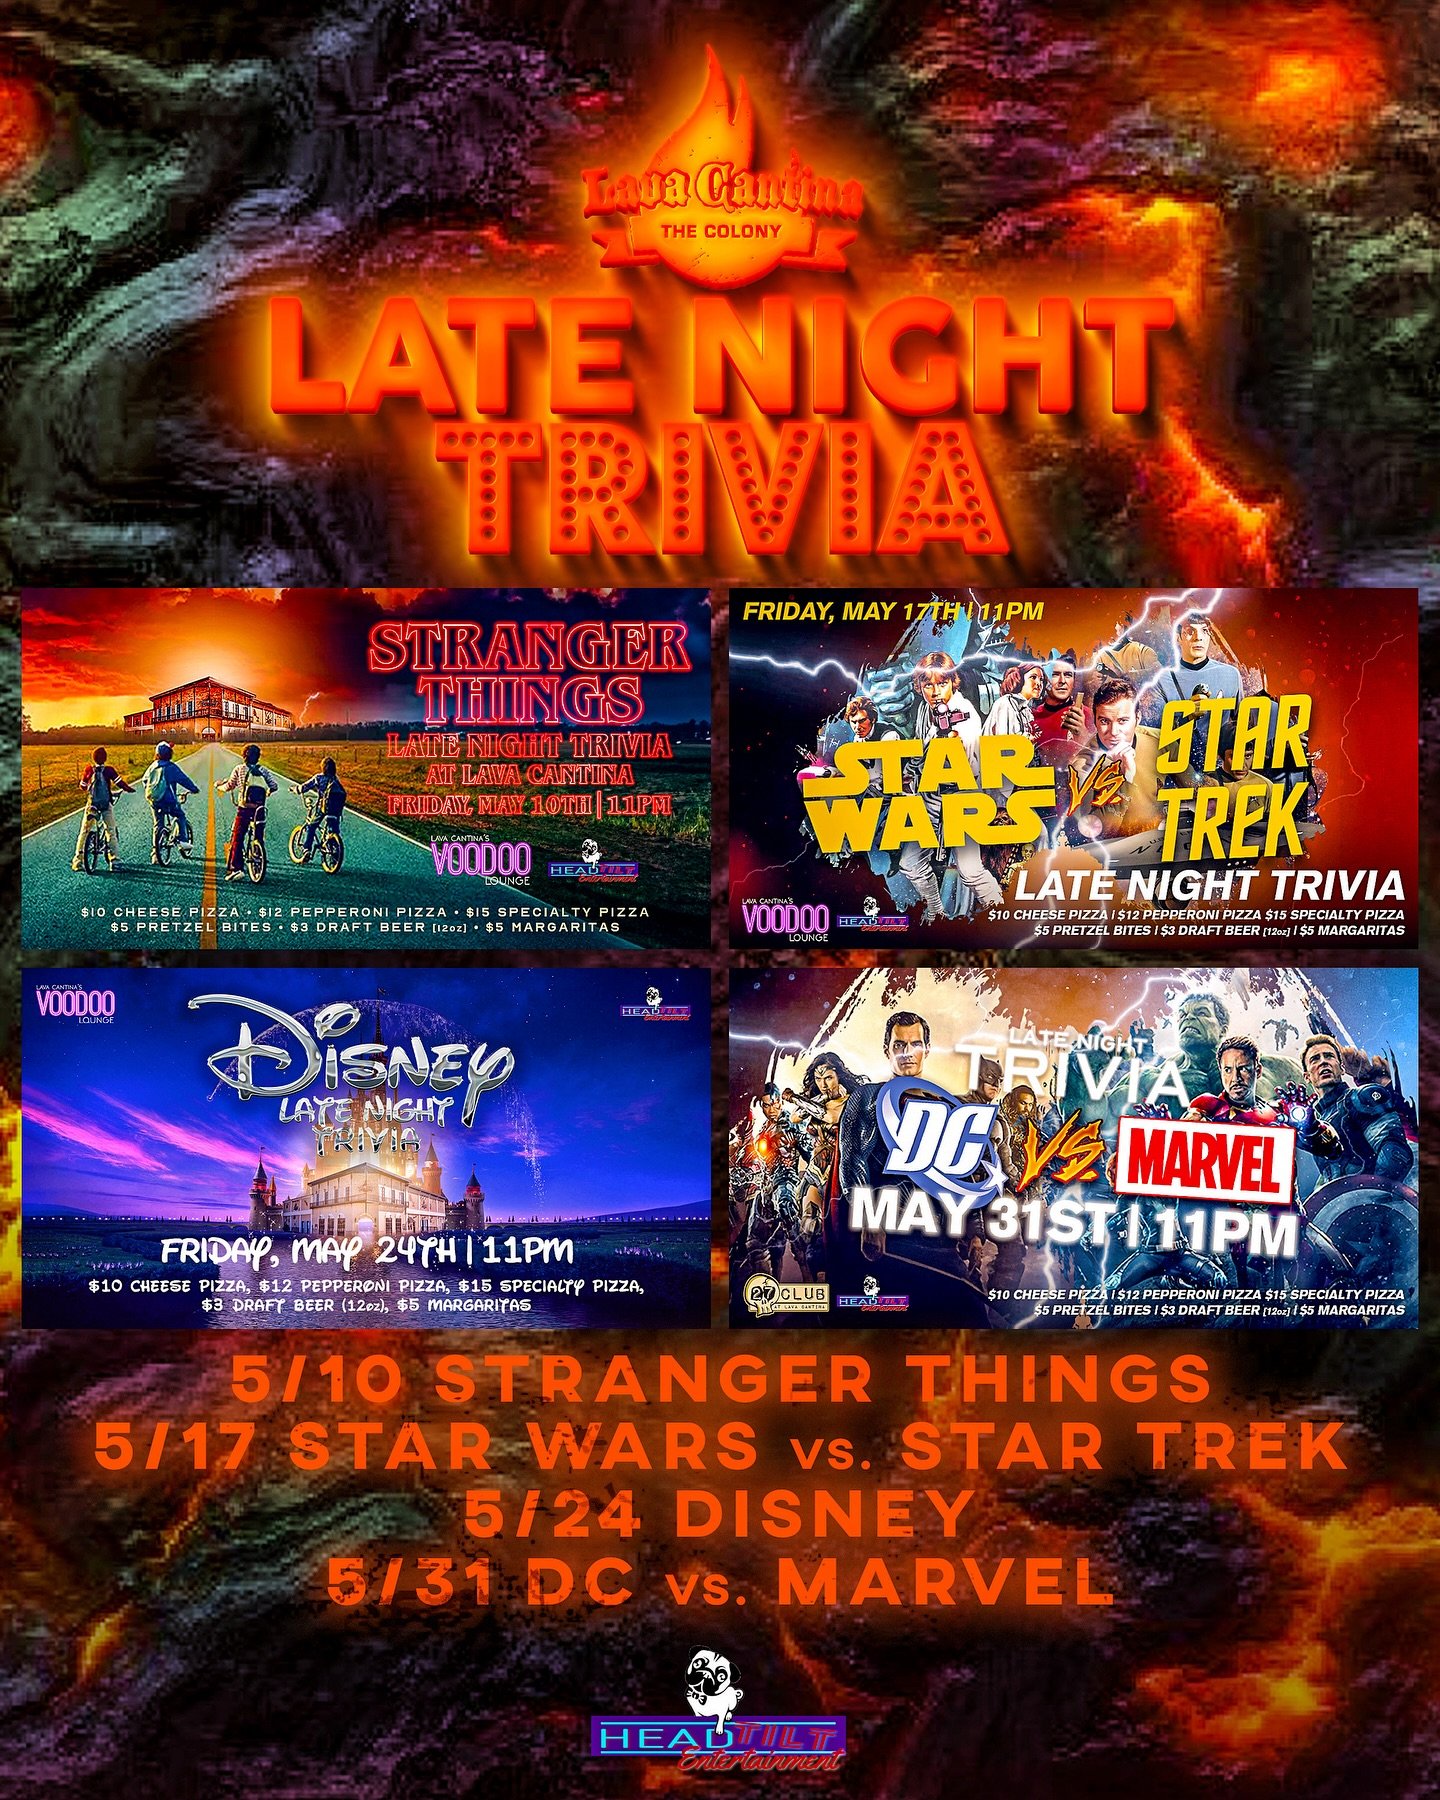 ‼️LATE NIGHT TRIVIA‼️ @lavacantinatc is ON FIRE 🔥🔥🔥 

👀Check out our lineup for May!👀
presented by @headtiltfun 

🤓LET YOUR INNER NERD OUT while enjoying $3 Draft Beer (12oz), $5 Margaritas, $5 Pretzel Bites, $10 Cheese Pizza, $12 Pepperoni Piz